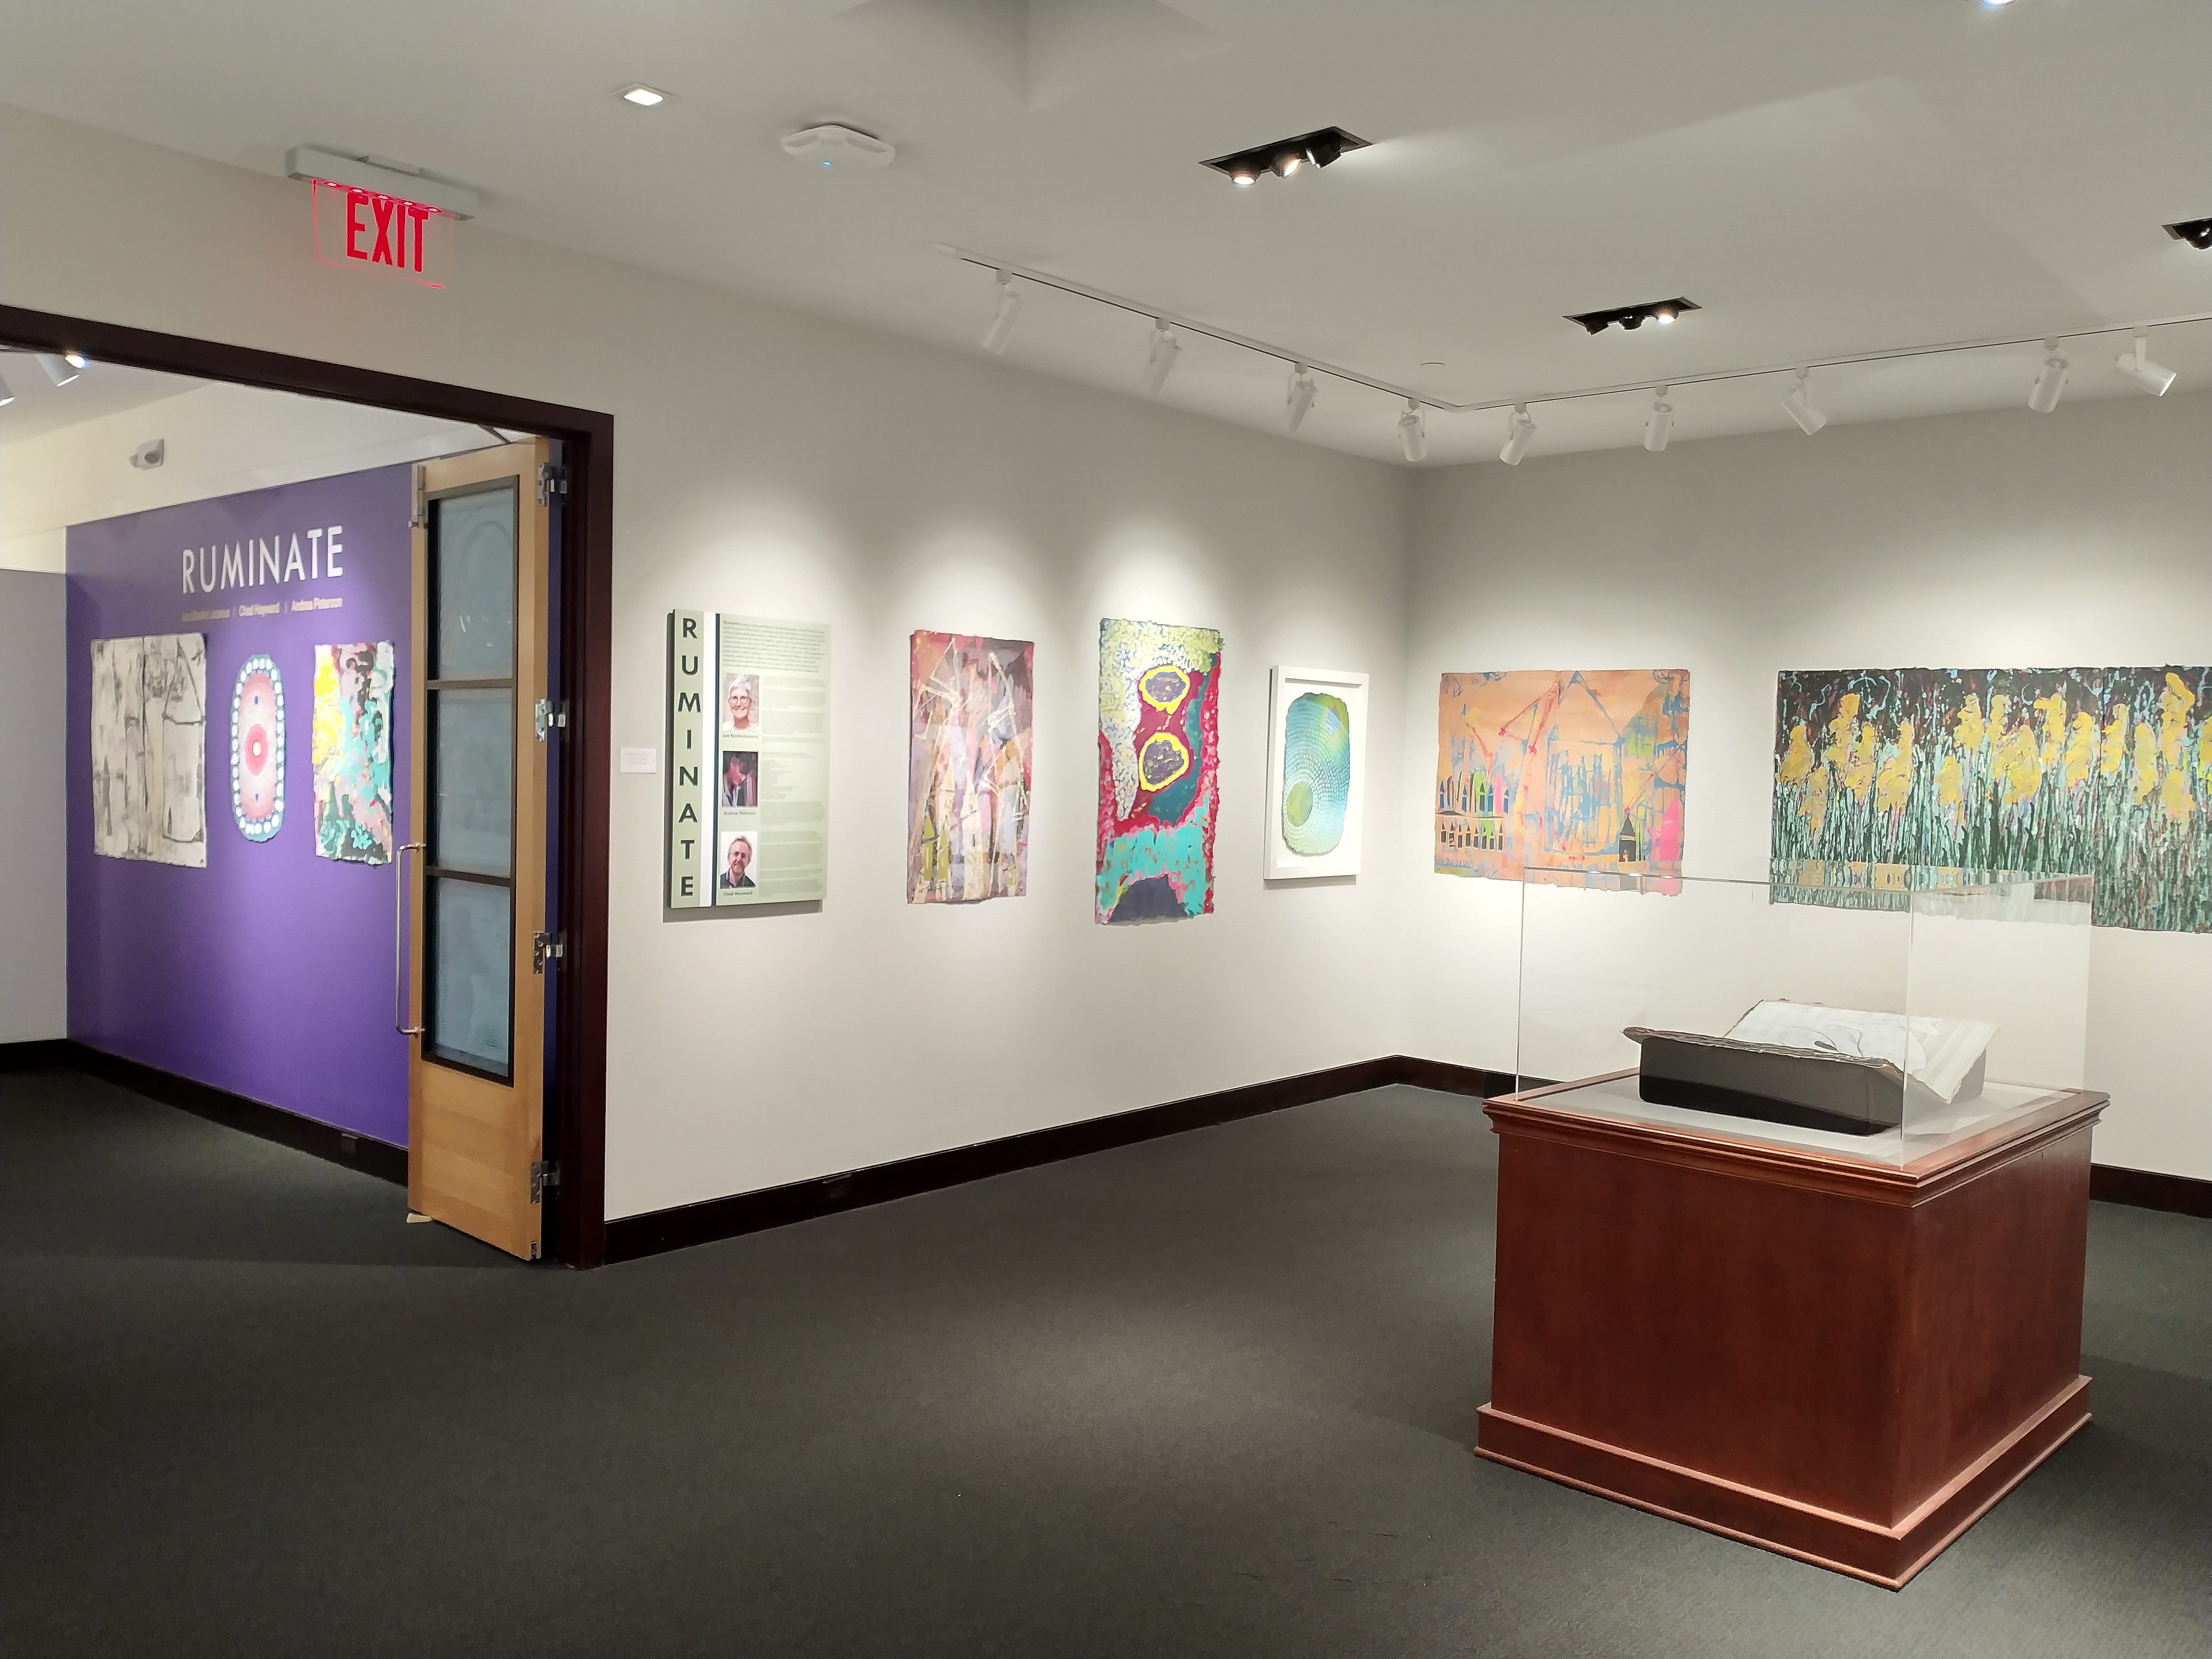 View of the wall to the left of the door as you enter. This intro wall has a board with the headshot of each of the artists along with their artists statements. To the right of the intro board are three works of art, one pulp painting per an artist. Pulp painting to be described in the next image.